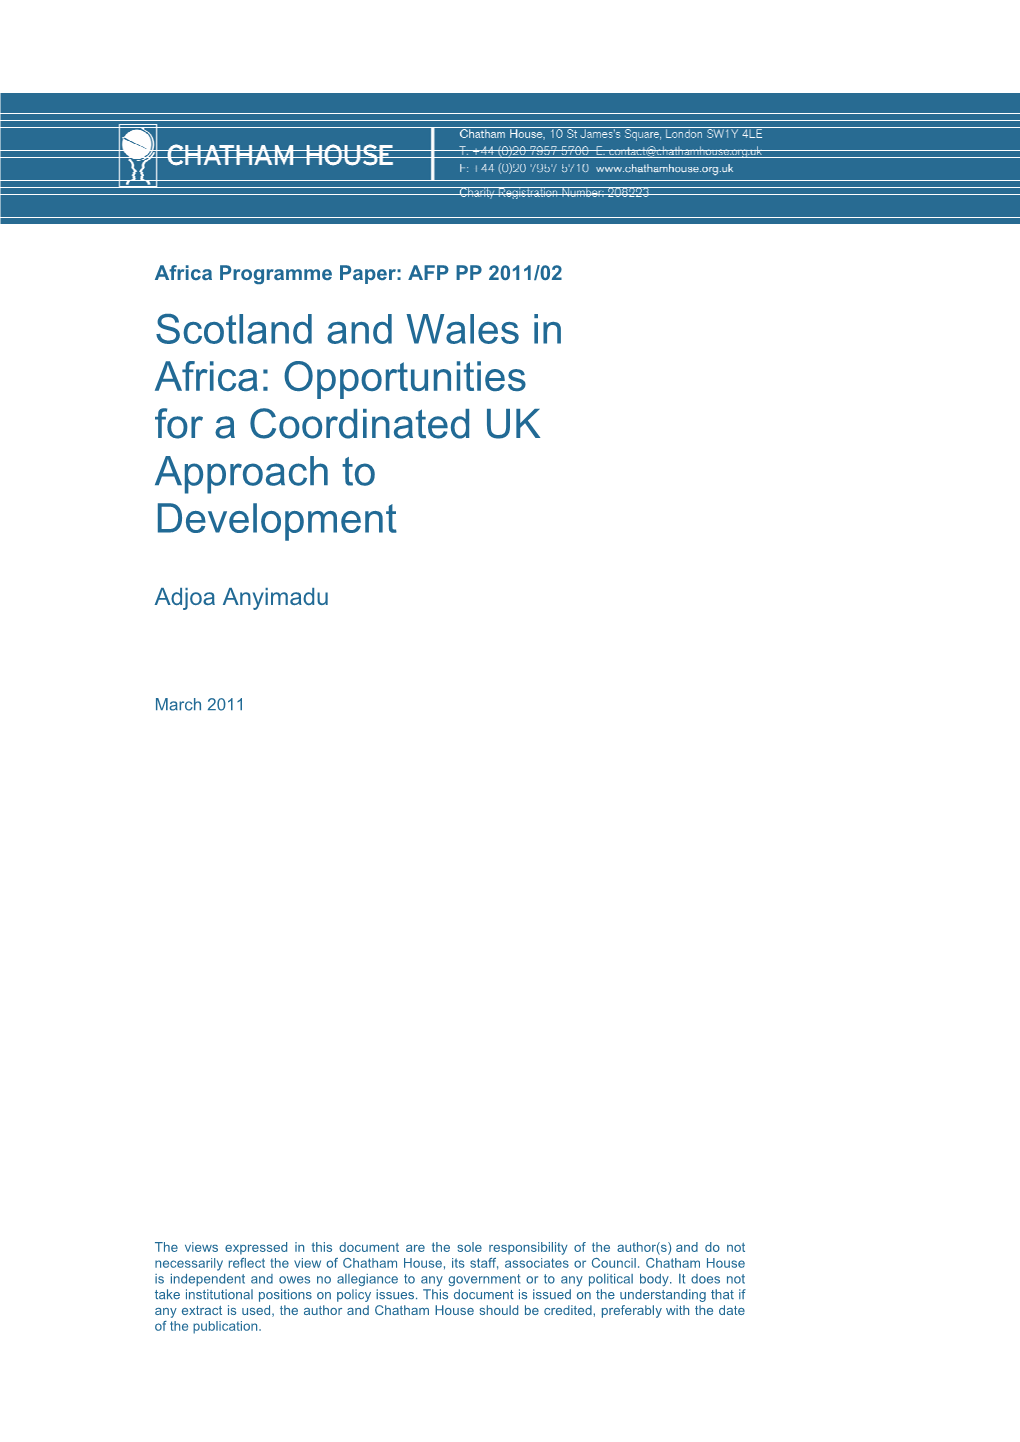 Scotland and Wales in Africa: Opportunities for a Coordinated UK Approach to Development